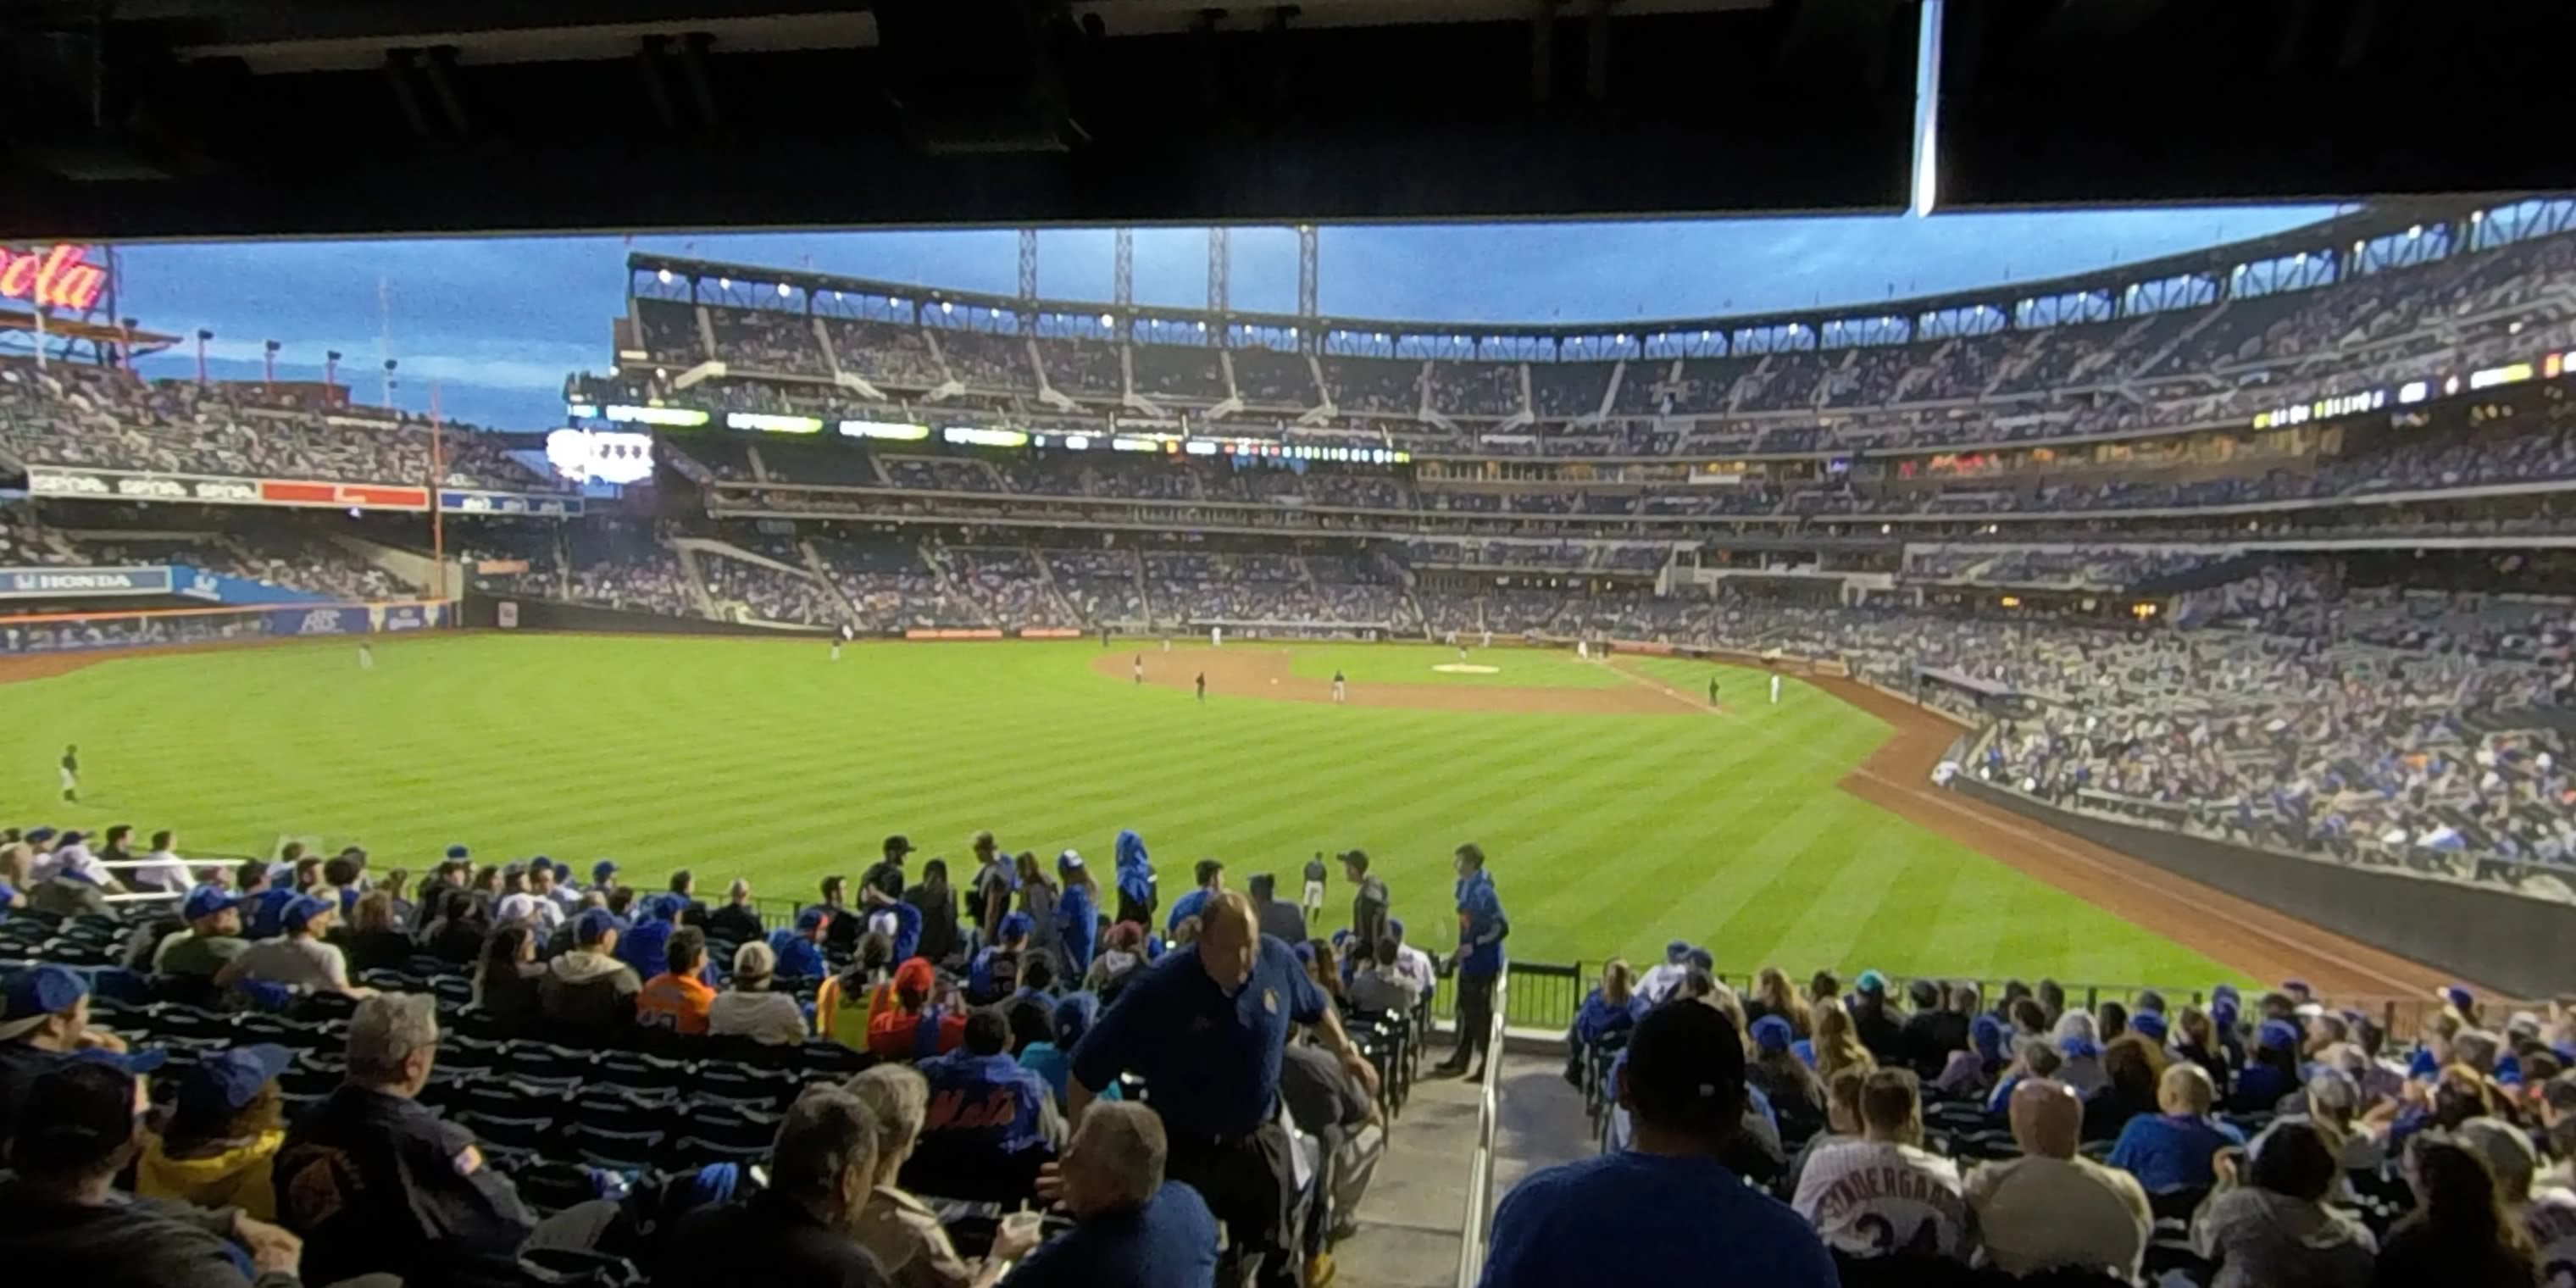 section 134 panoramic seat view  - citi field